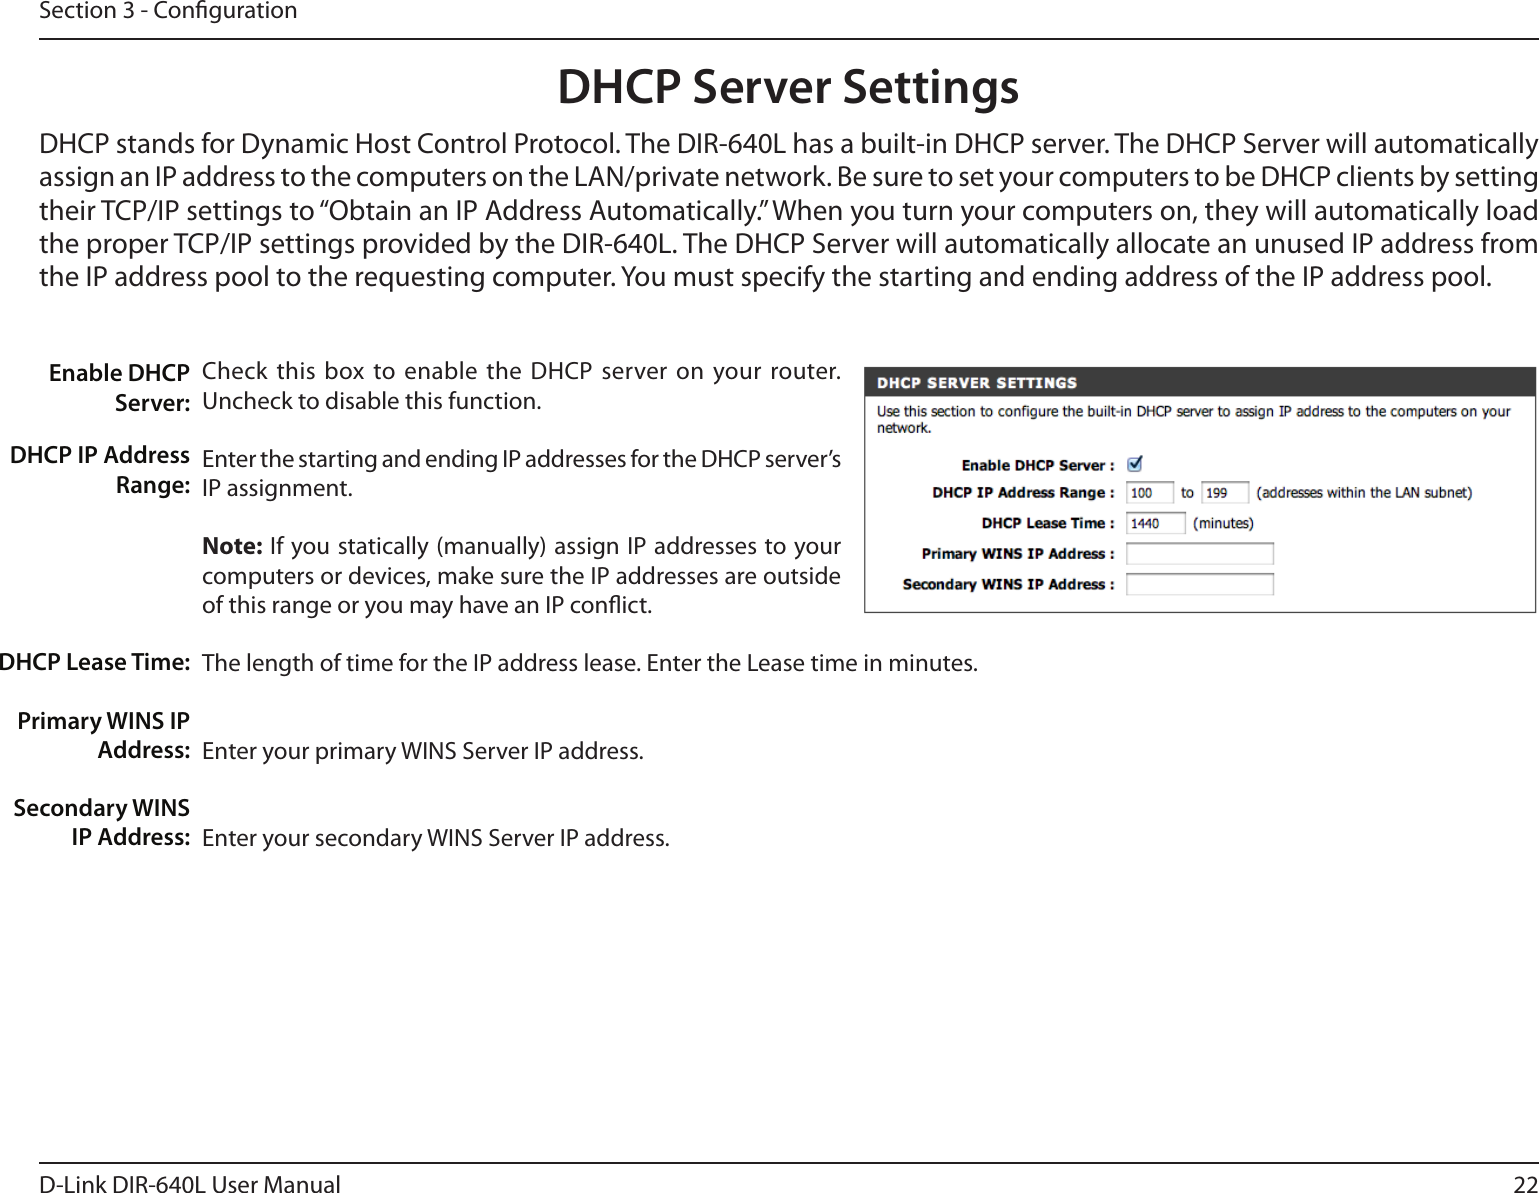 22D-Link DIR-640L User ManualSection 3 - CongurationDHCP Server SettingsDHCP stands for Dynamic Host Control Protocol. The DIR-640L has a built-in DHCP server. The DHCP Server will automatically assign an IP address to the computers on the LAN/private network. Be sure to set your computers to be DHCP clients by setting their TCP/IP settings to “Obtain an IP Address Automatically.” When you turn your computers on, they will automatically load the proper TCP/IP settings provided by the DIR-640L. The DHCP Server will automatically allocate an unused IP address from the IP address pool to the requesting computer. You must specify the starting and ending address of the IP address pool.Check this  box to enable  the DHCP  server on your router. Uncheck to disable this function.Enter the starting and ending IP addresses for the DHCP server’s IP assignment.Note: If you statically (manually) assign IP addresses to your computers or devices, make sure the IP addresses are outside of this range or you may have an IP conict. The length of time for the IP address lease. Enter the Lease time in minutes.Enter your primary WINS Server IP address.Enter your secondary WINS Server IP address.Enable DHCP Server:DHCP IP Address Range:DHCP Lease Time:Primary WINS IP Address:Secondary WINS IP Address: